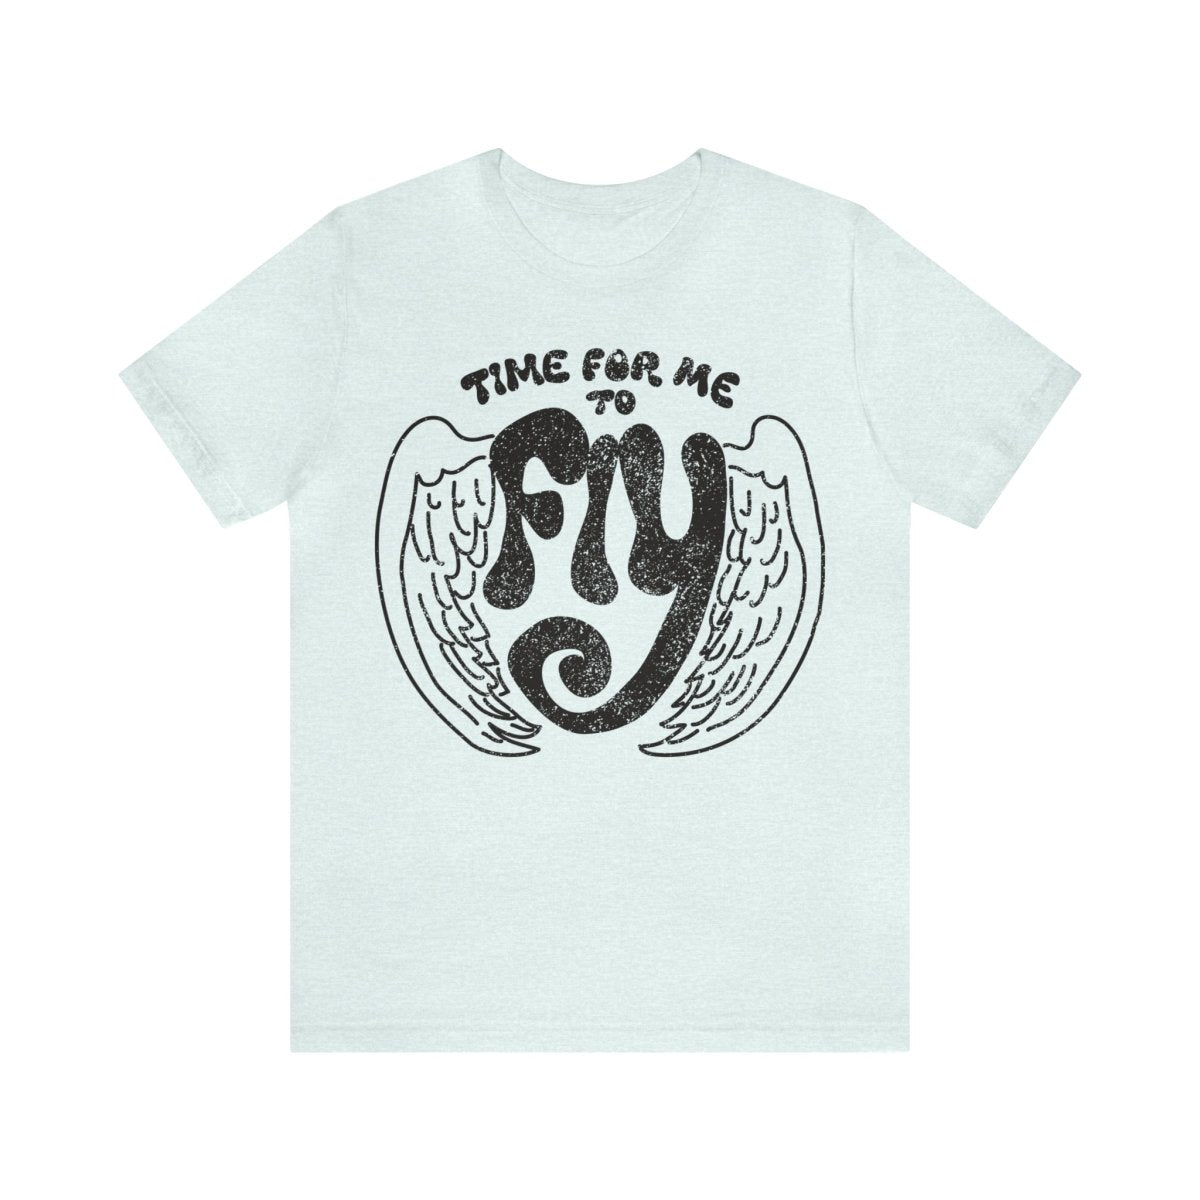 Time For Me To Fly Premium T-Shirt, New Relationship, Moving, Startup, Graduation